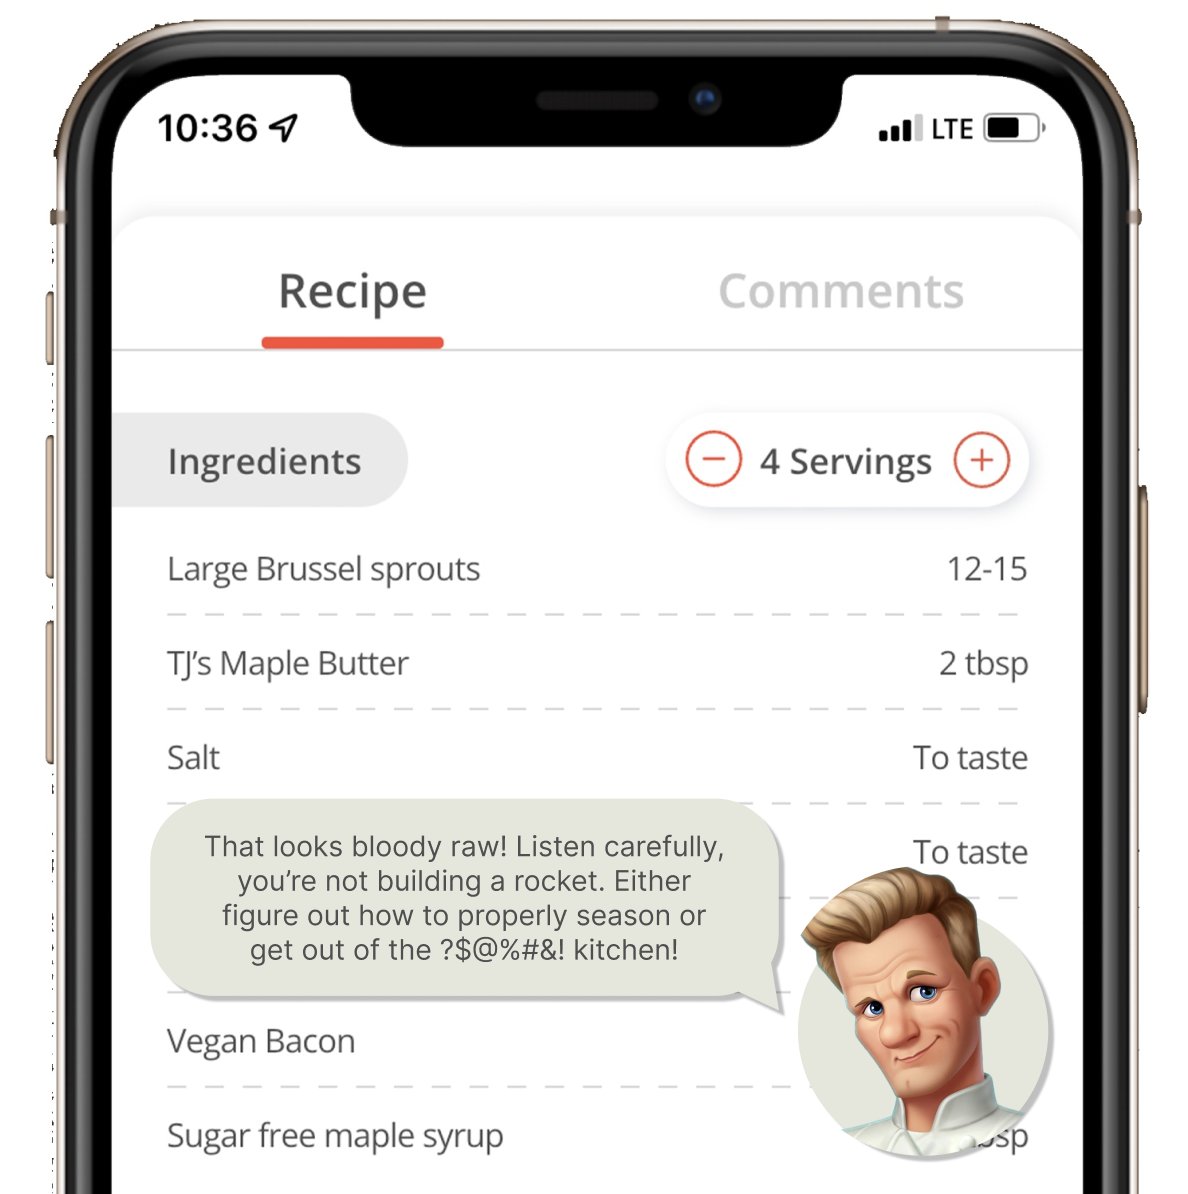 In honor of myself & @peppertheapp appearing on @GordonRamsay's new show, #FoodStars, tomorrow @ 9PM on @FOXTV this week's product of the week is...

Pepper, but with a Gordon Ramsay kitchen assistant https://t.co/VIz33UIhC9